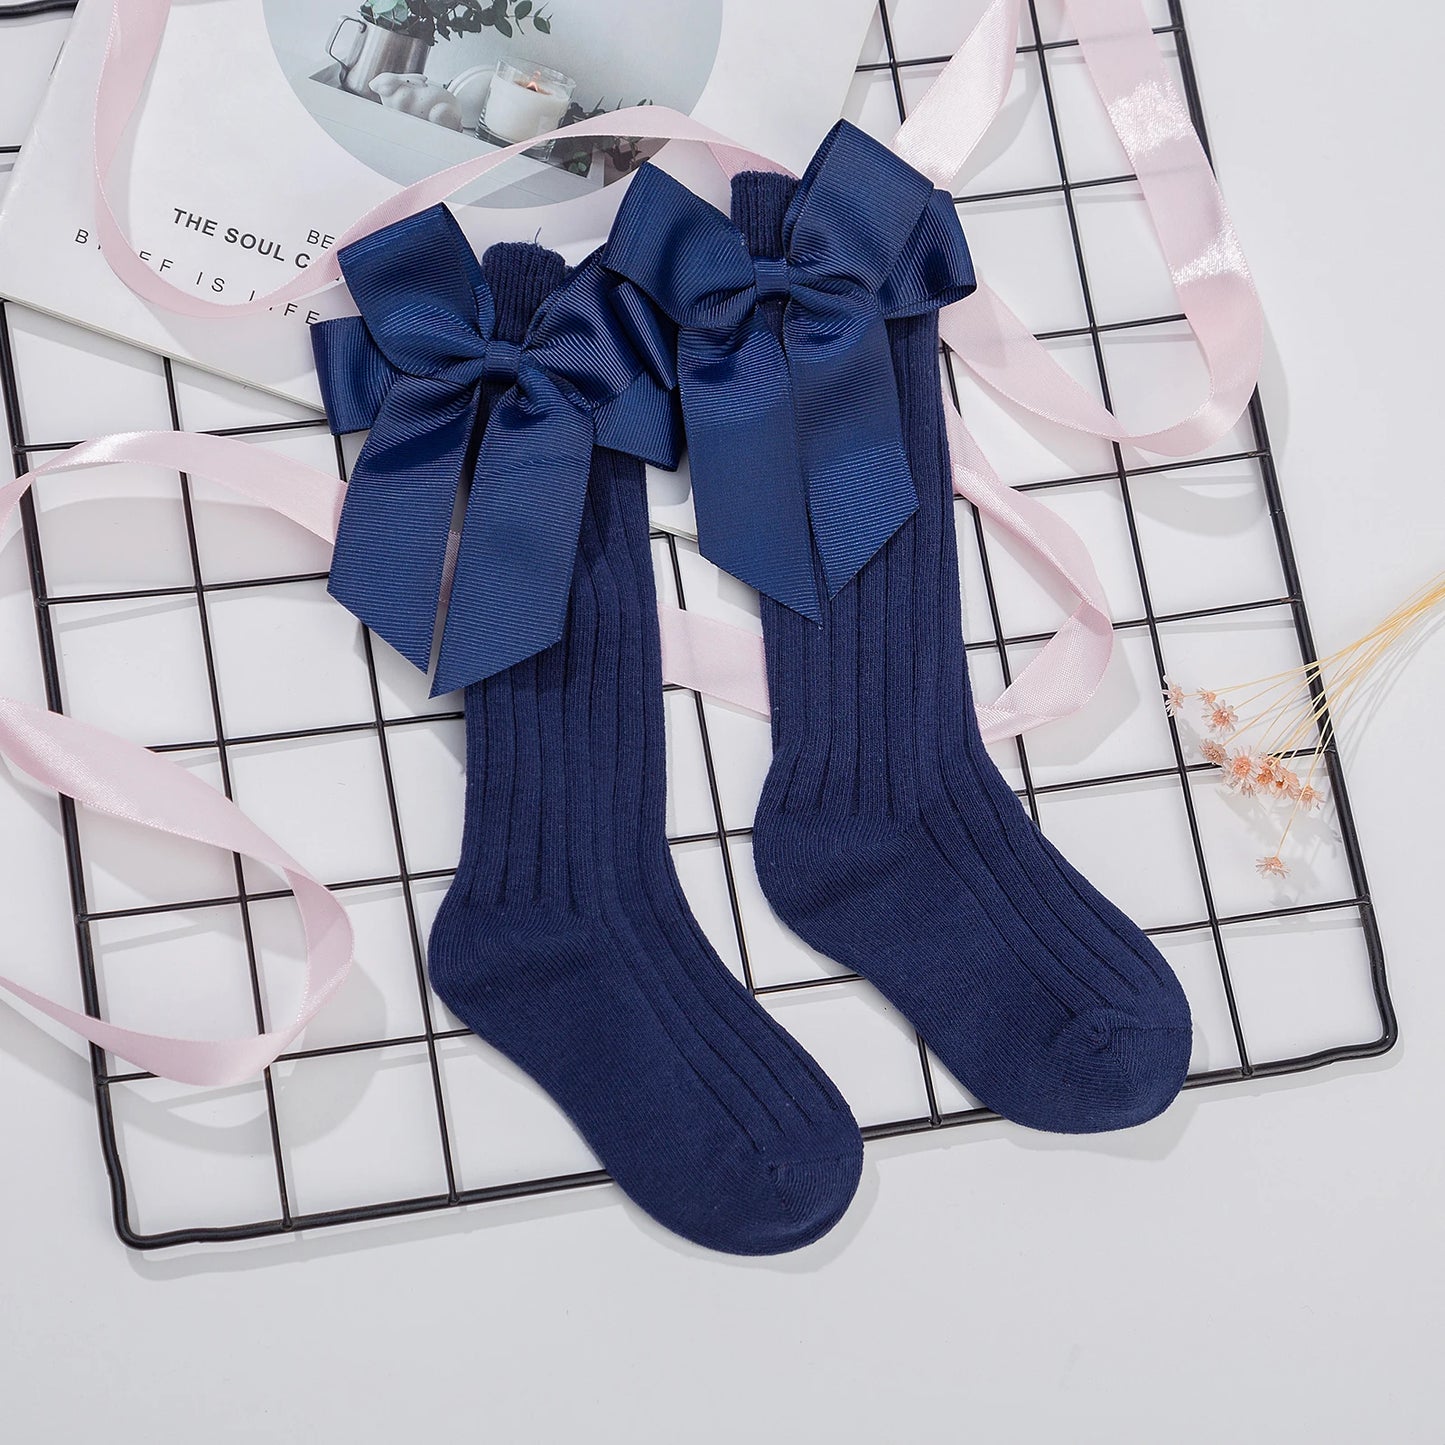 Cotton Bow Socks For Girls Knee High Infant - Toddlers